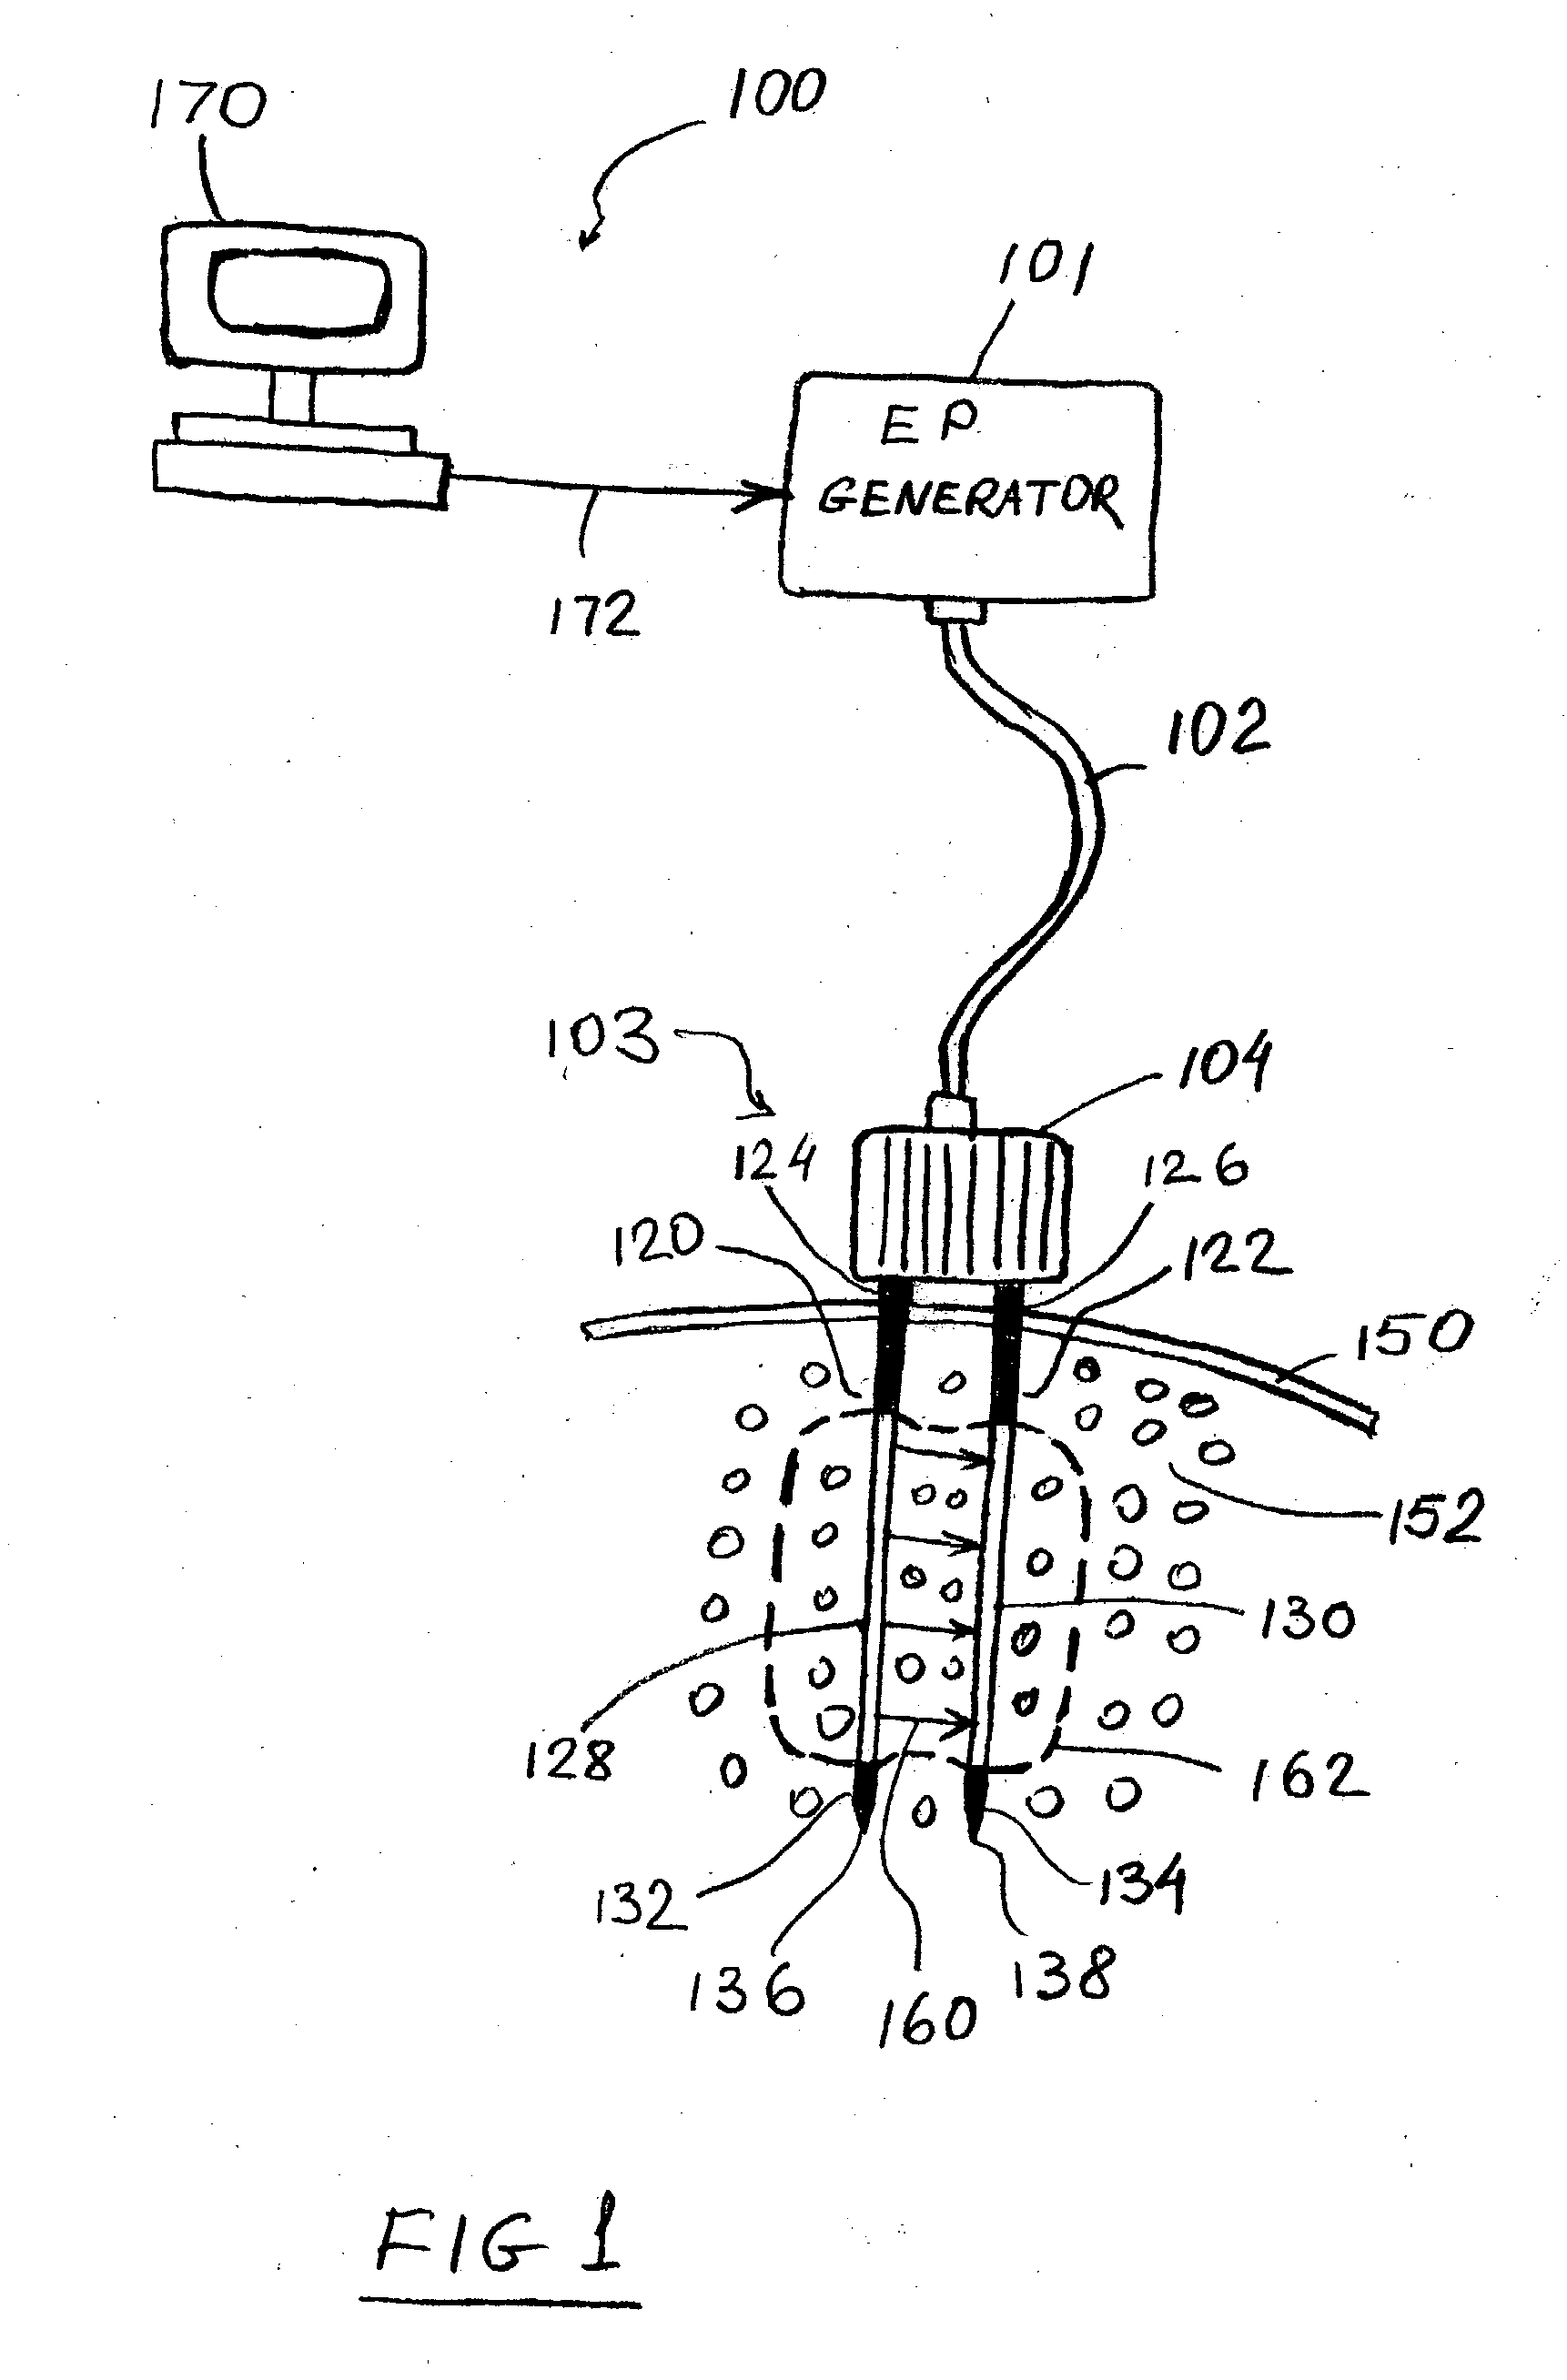 Apparatus and method for reducing subcutaneous fat deposits by electroporation